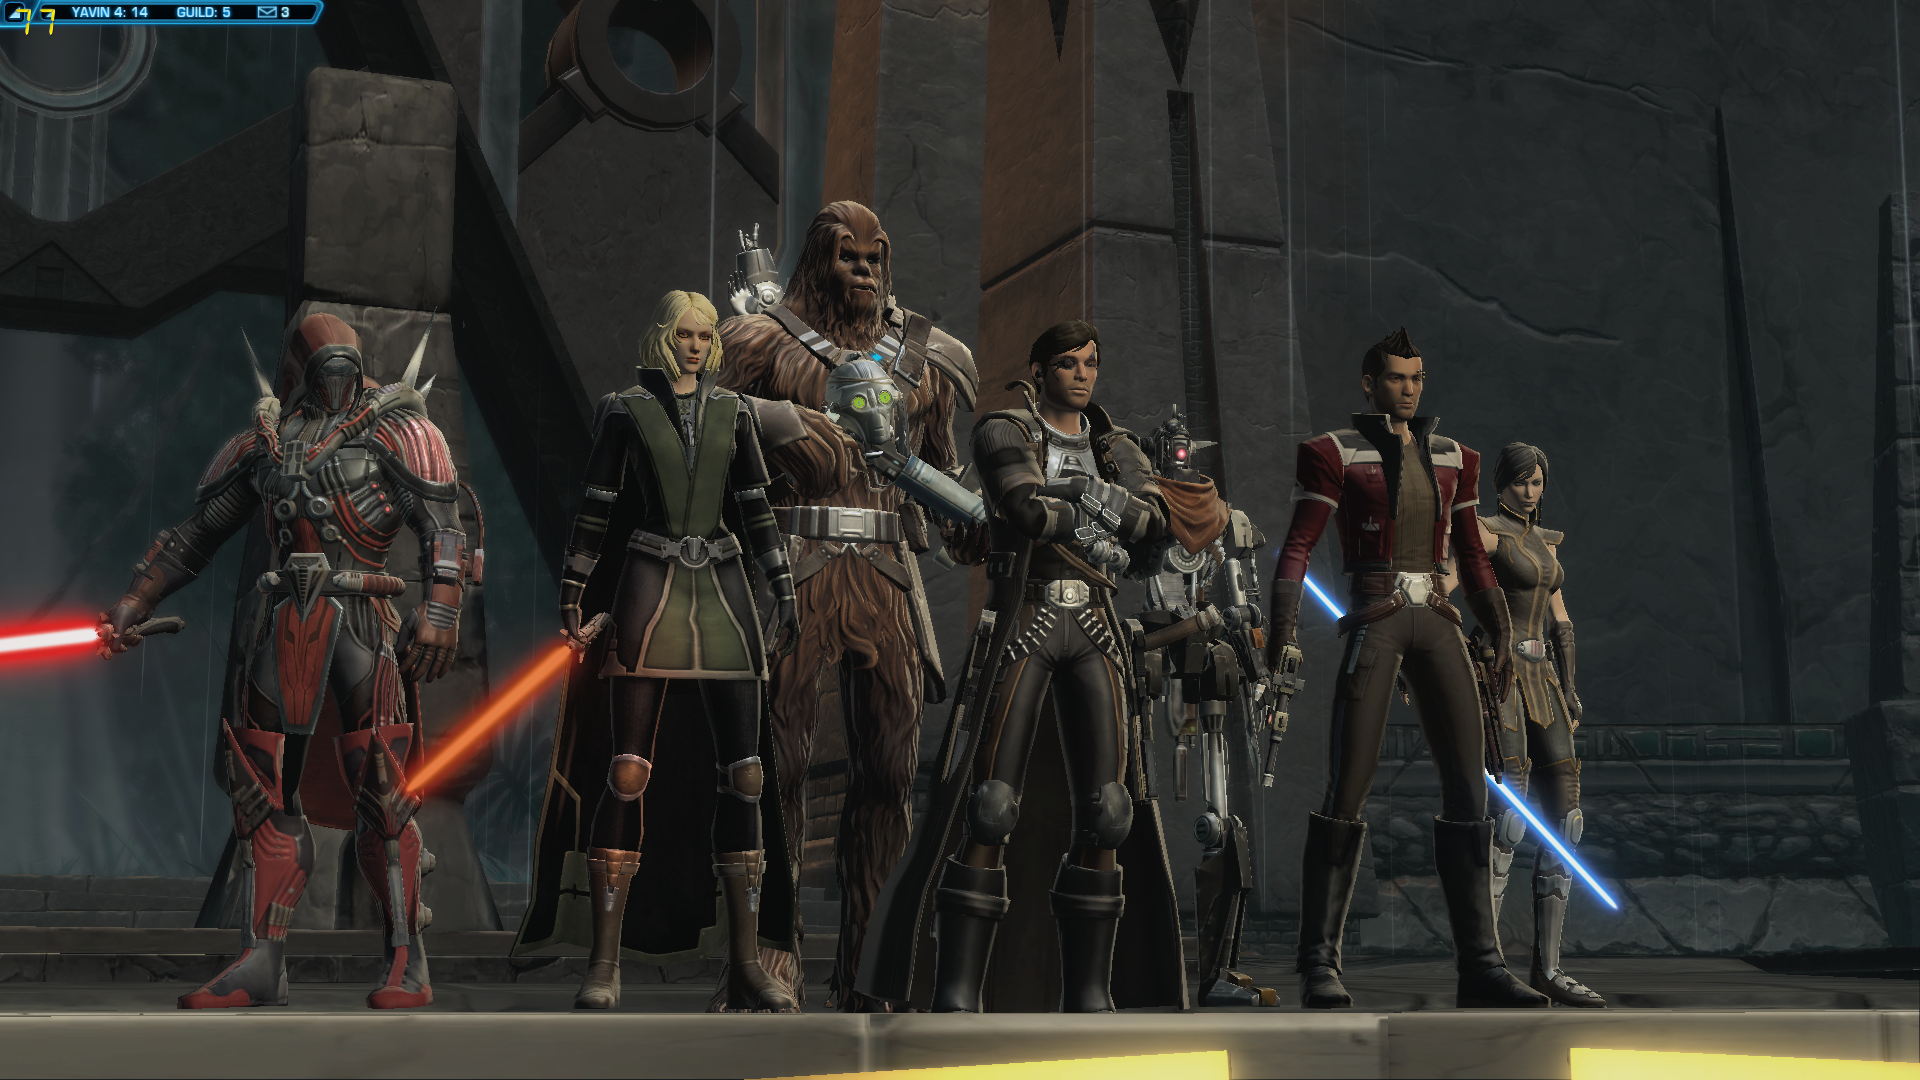 Swtor Captain Vergil and the Coalition by DanteDT34 on